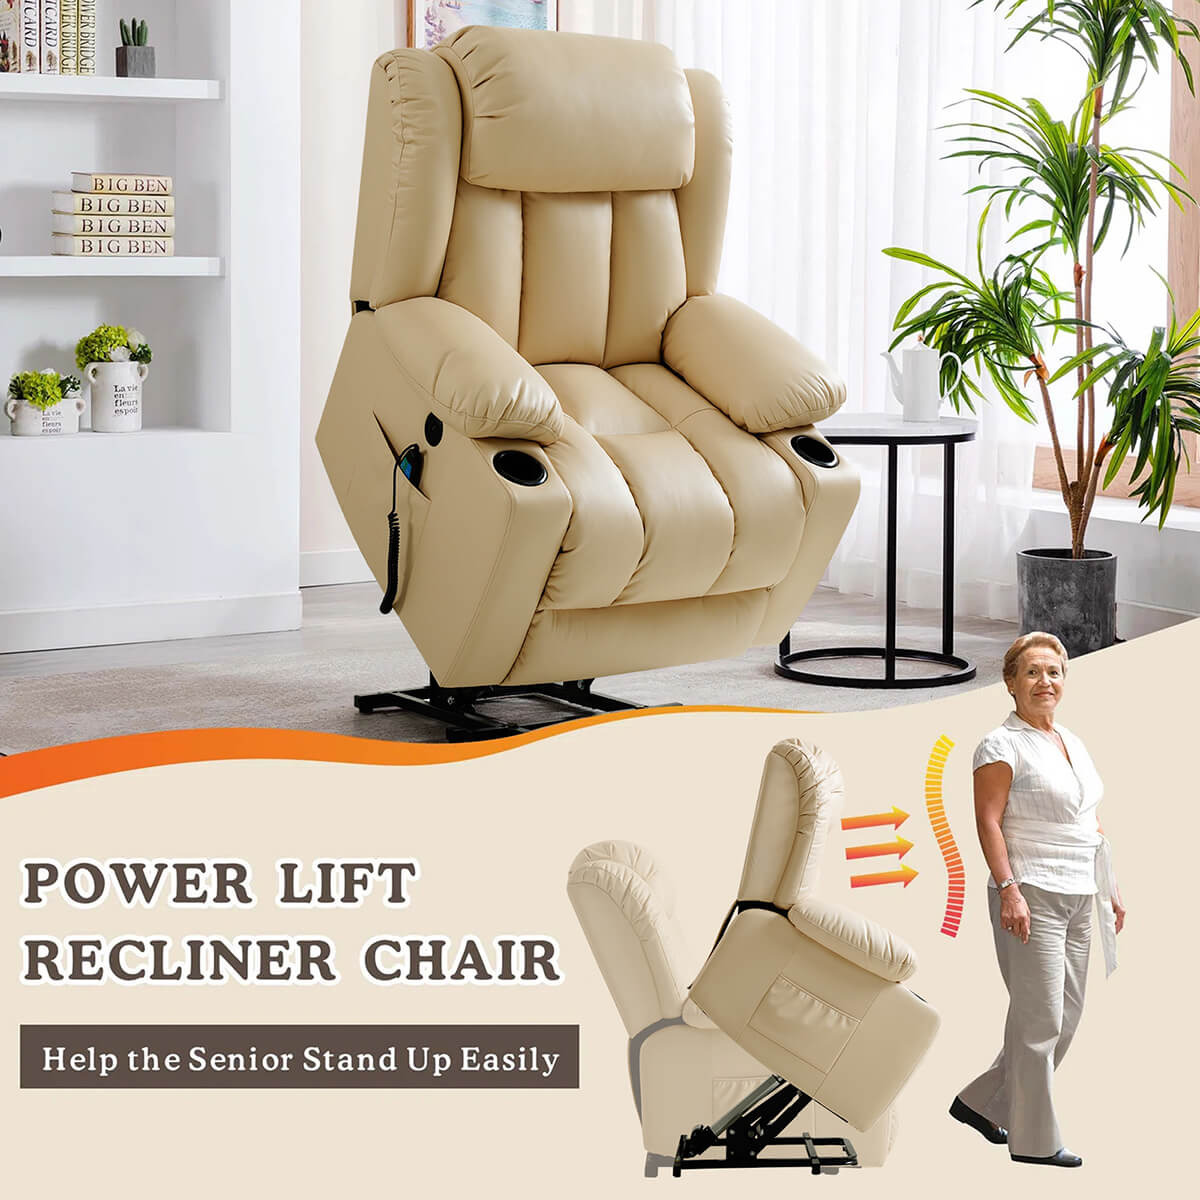 Soulout Luxury Lift Recliner Chairs With Massage and Heating, Beige